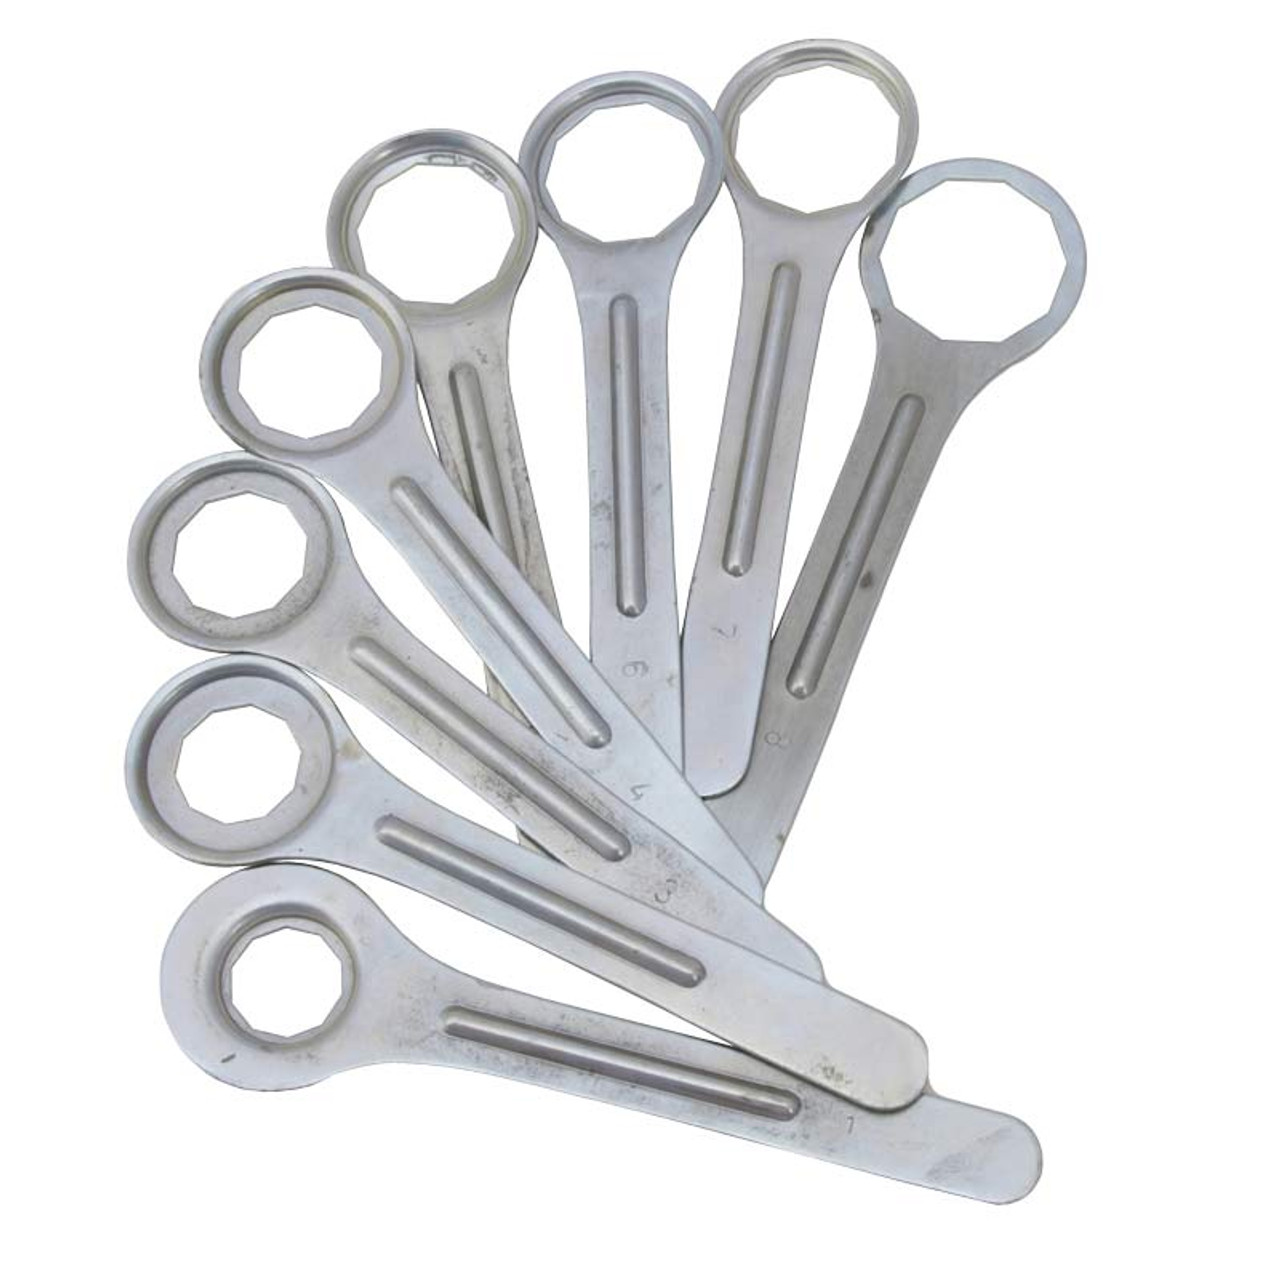 case-opening-wrenches-59.0574__21128.1518809814.jpg